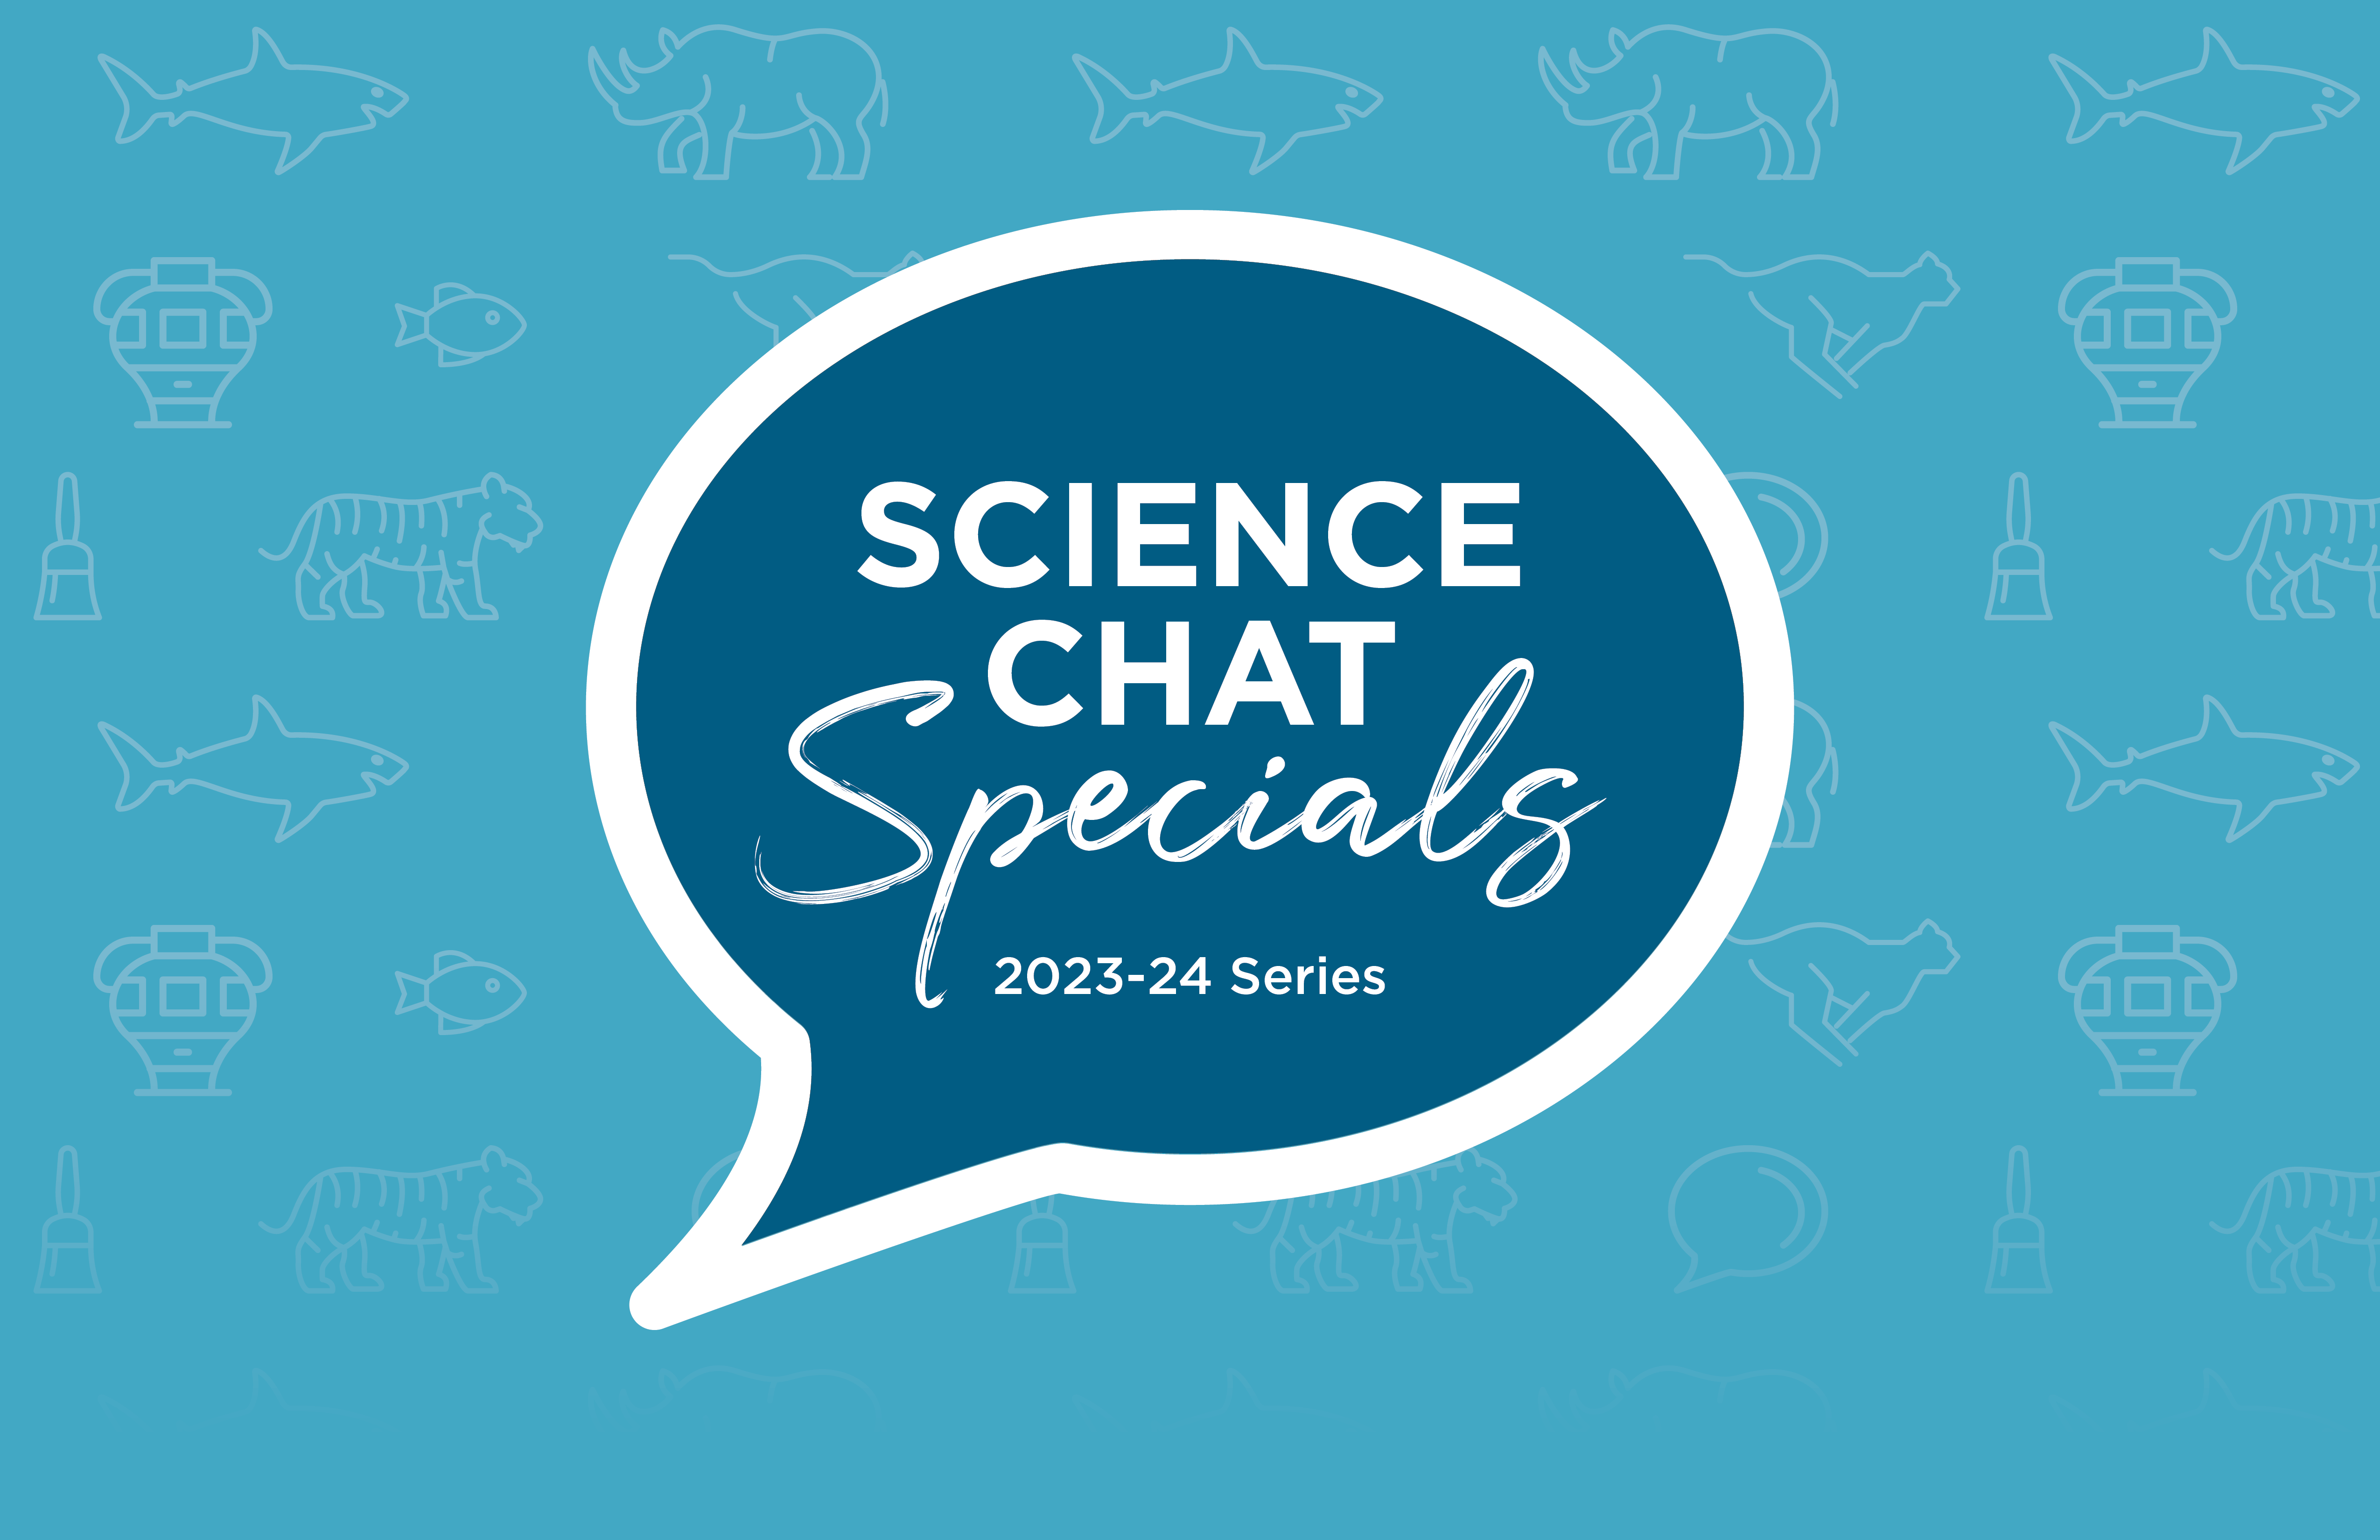 Science Chat Specials 2023-24 Series